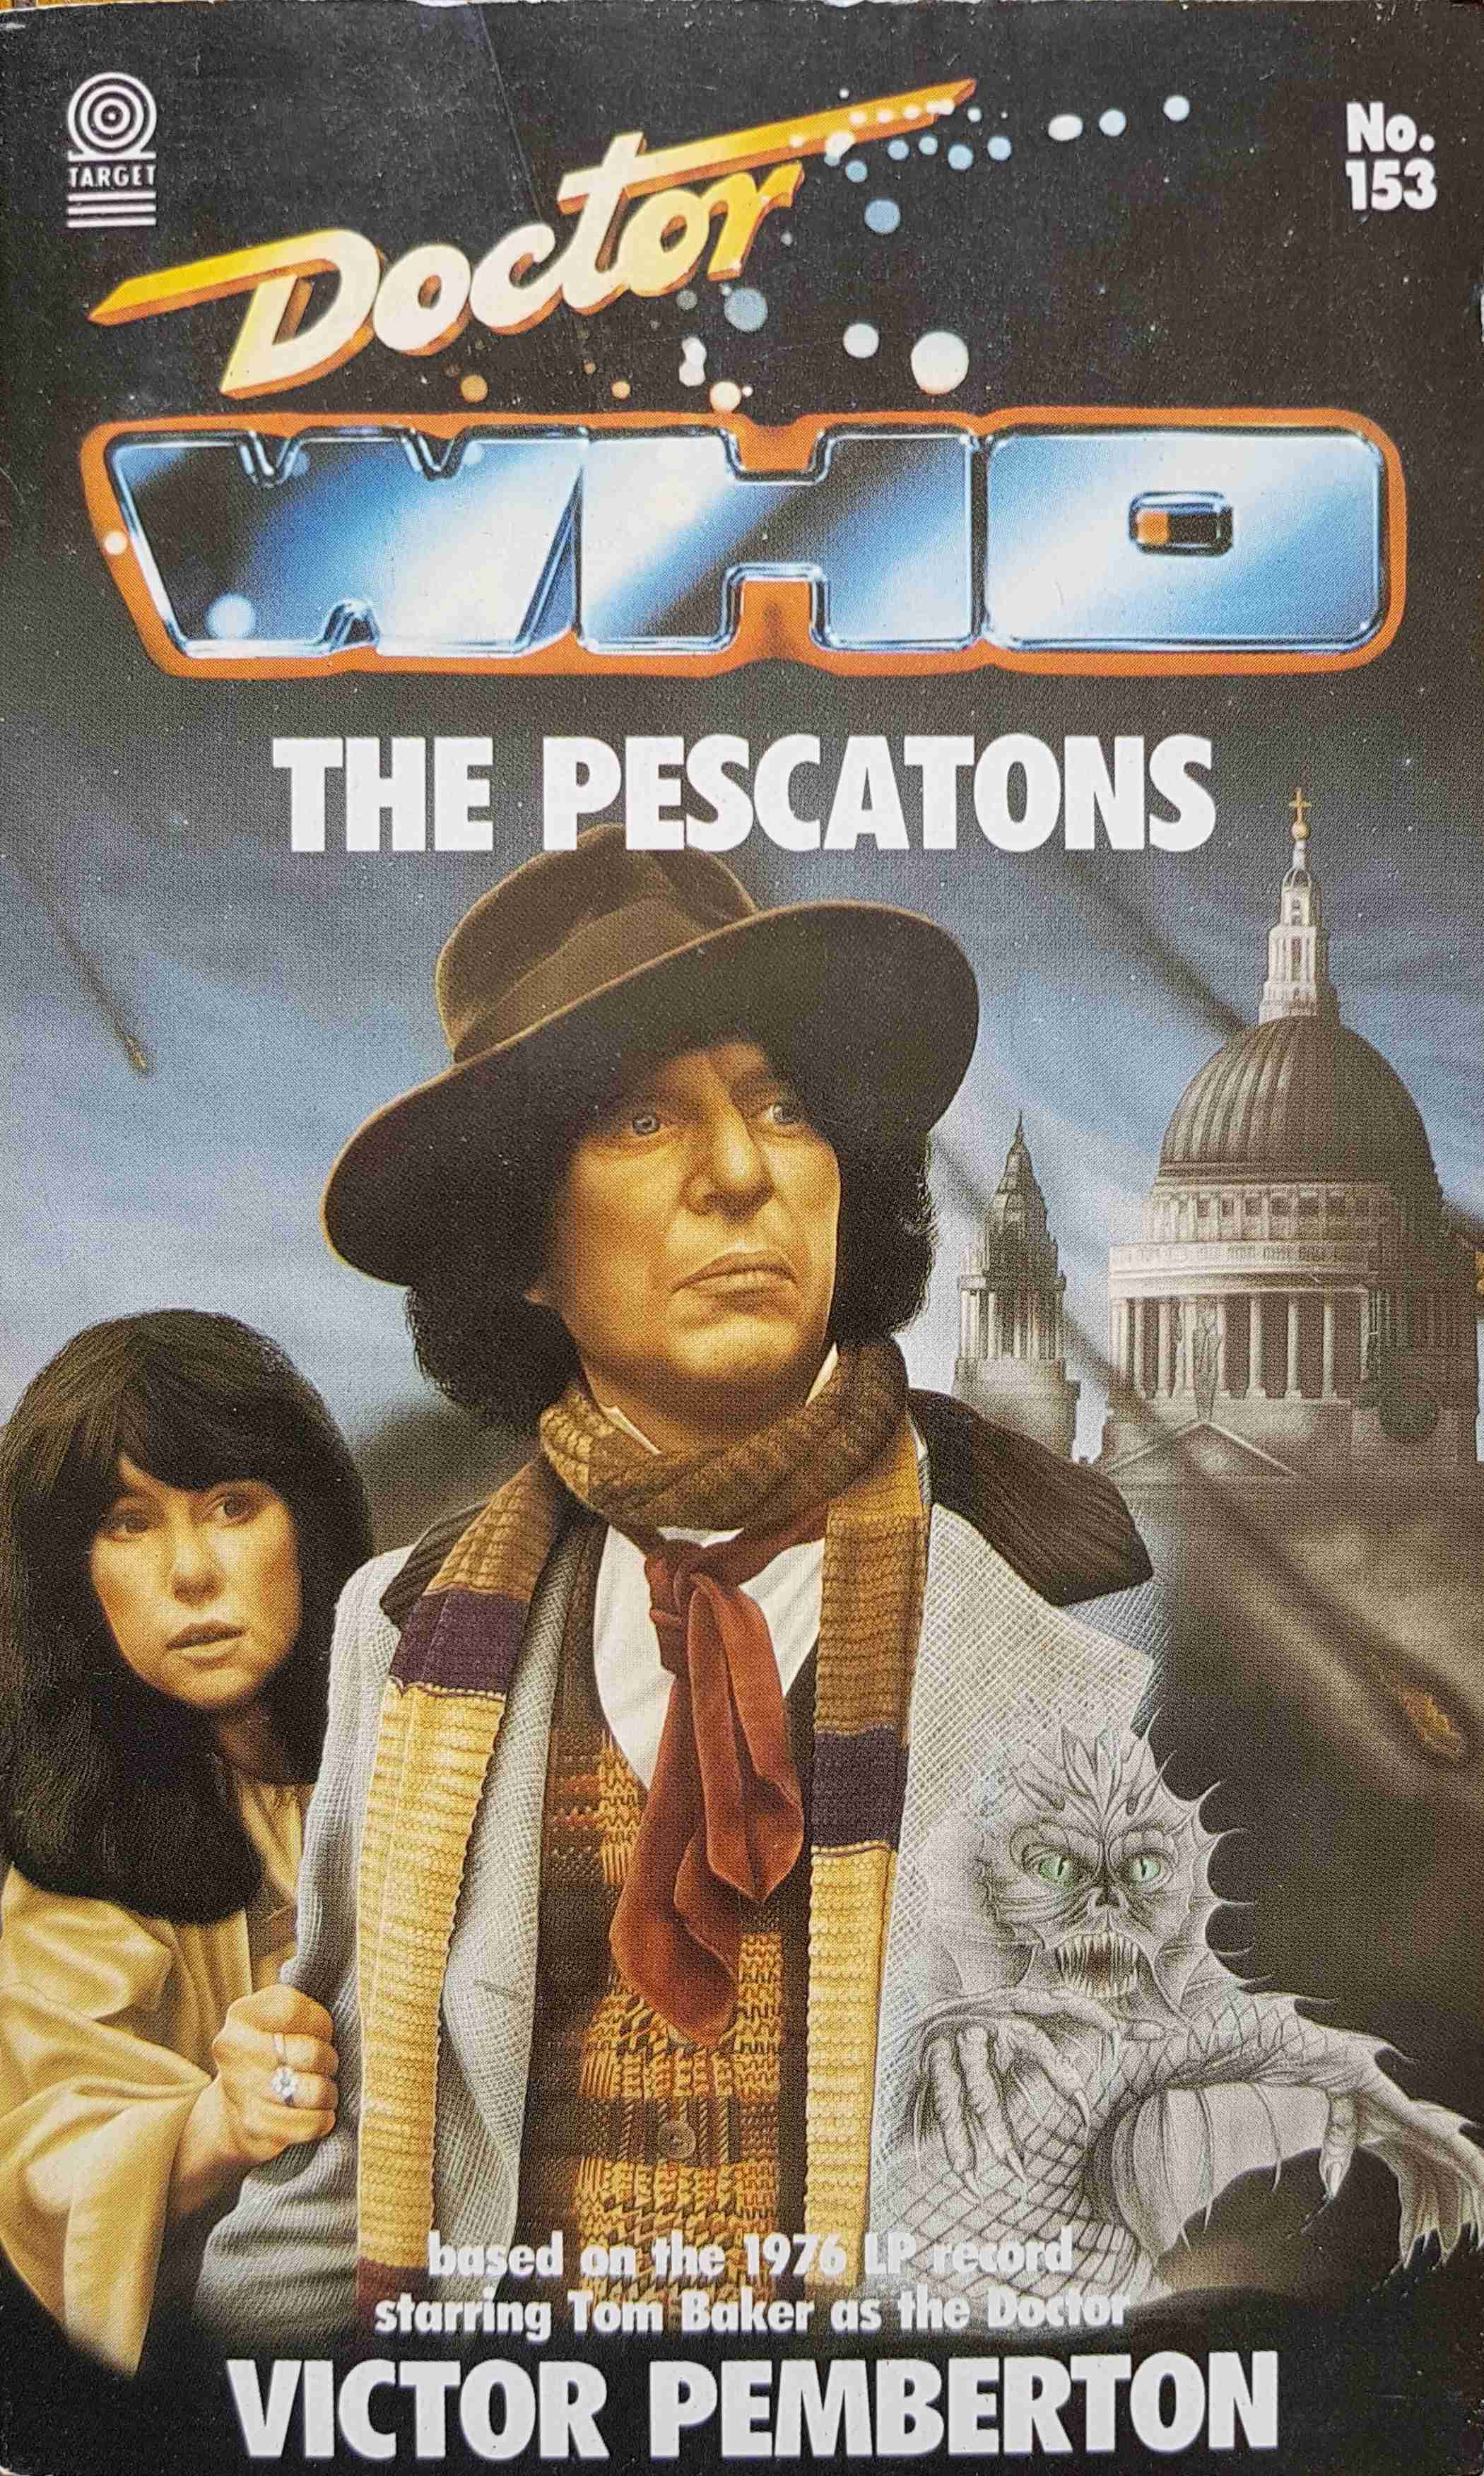 Picture of 0-426-20353-4 Doctor Who - The Prescatons by artist Victor Pemberton from the BBC records and Tapes library